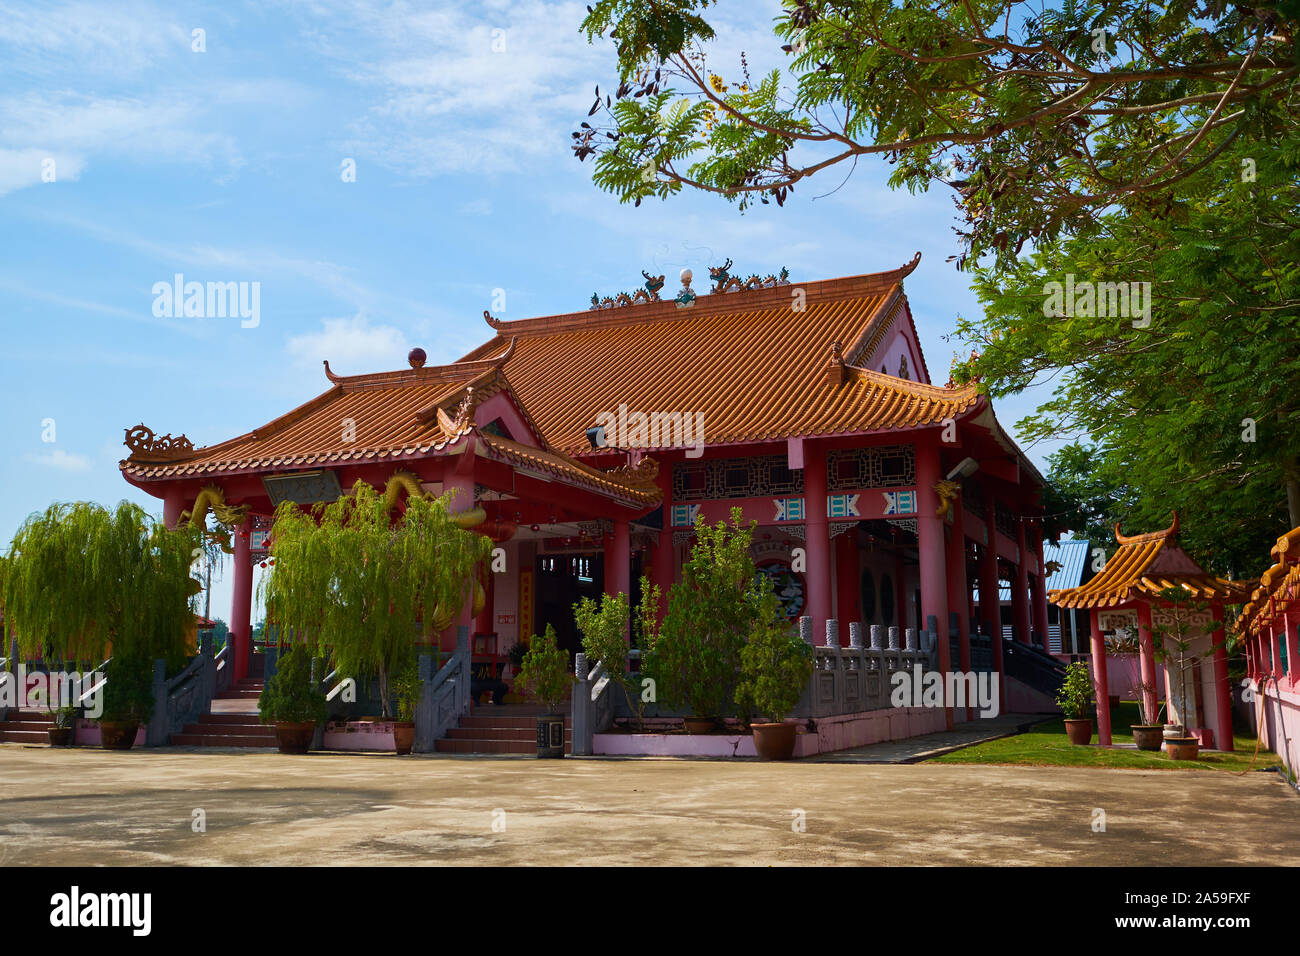 The Chinese temple, Lie Sheng Gong, in the town of Pekan. In Pahang, Malaysia. Stock Photo